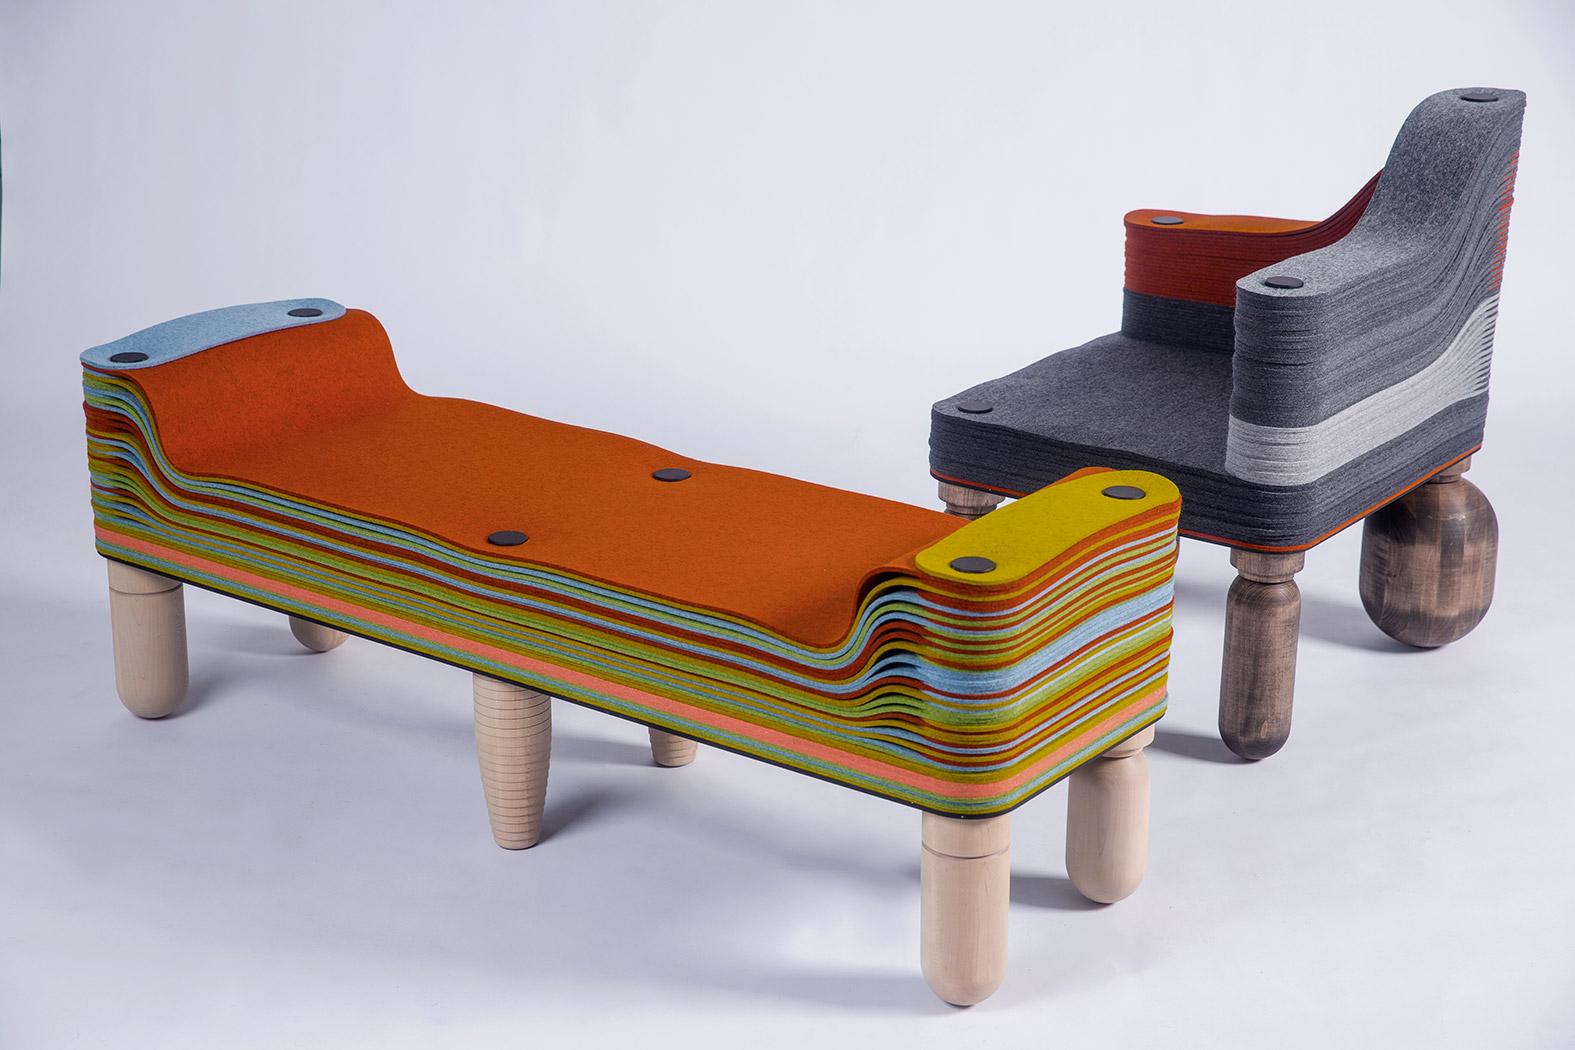 Machine-Made Maxine, Felt and Wood Bench, Benoist F. Drut in Stackabl, Canada, 2021 For Sale